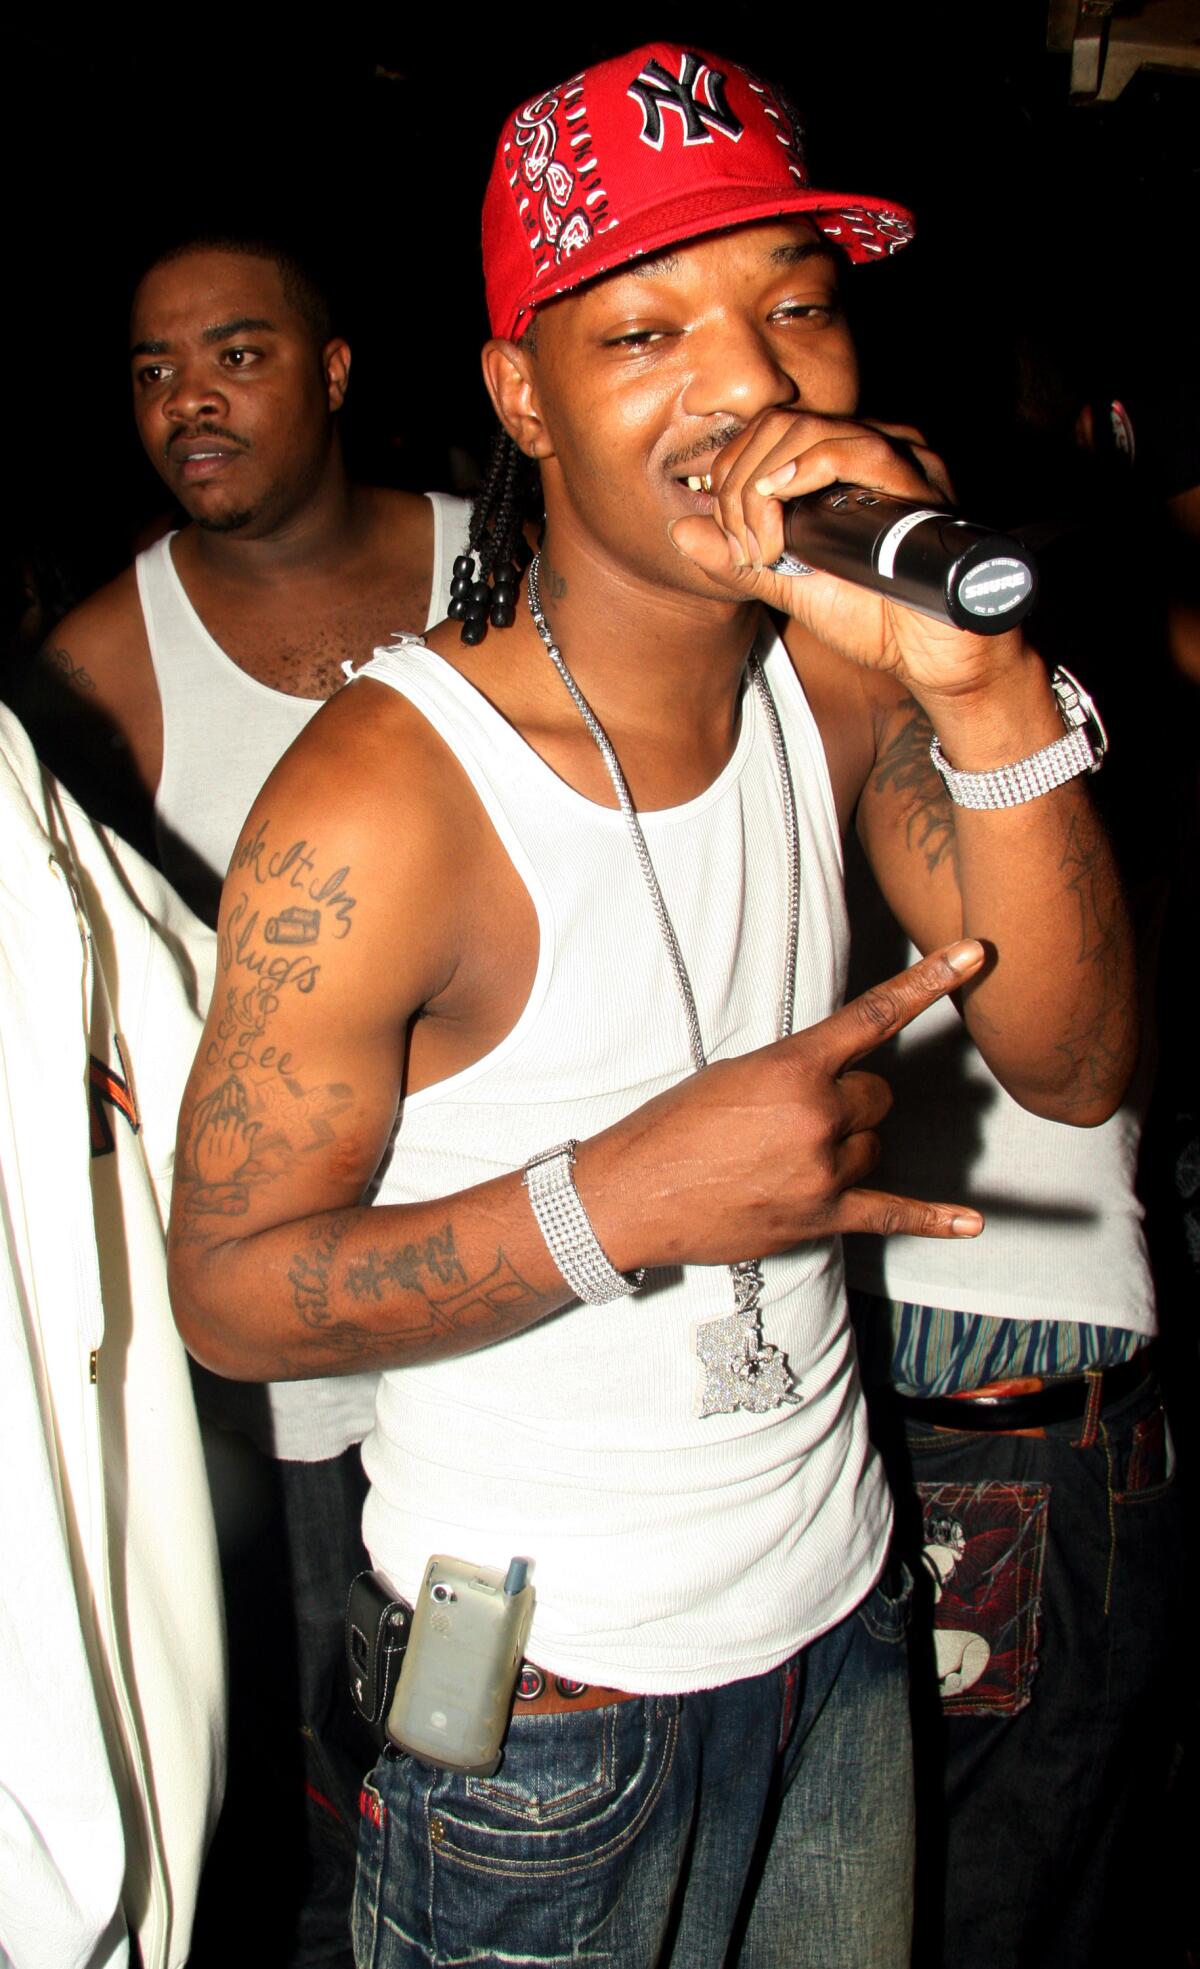 Rapper BG, in a white tank top and red Yankees cap, smiles while holding a mic to his mouth